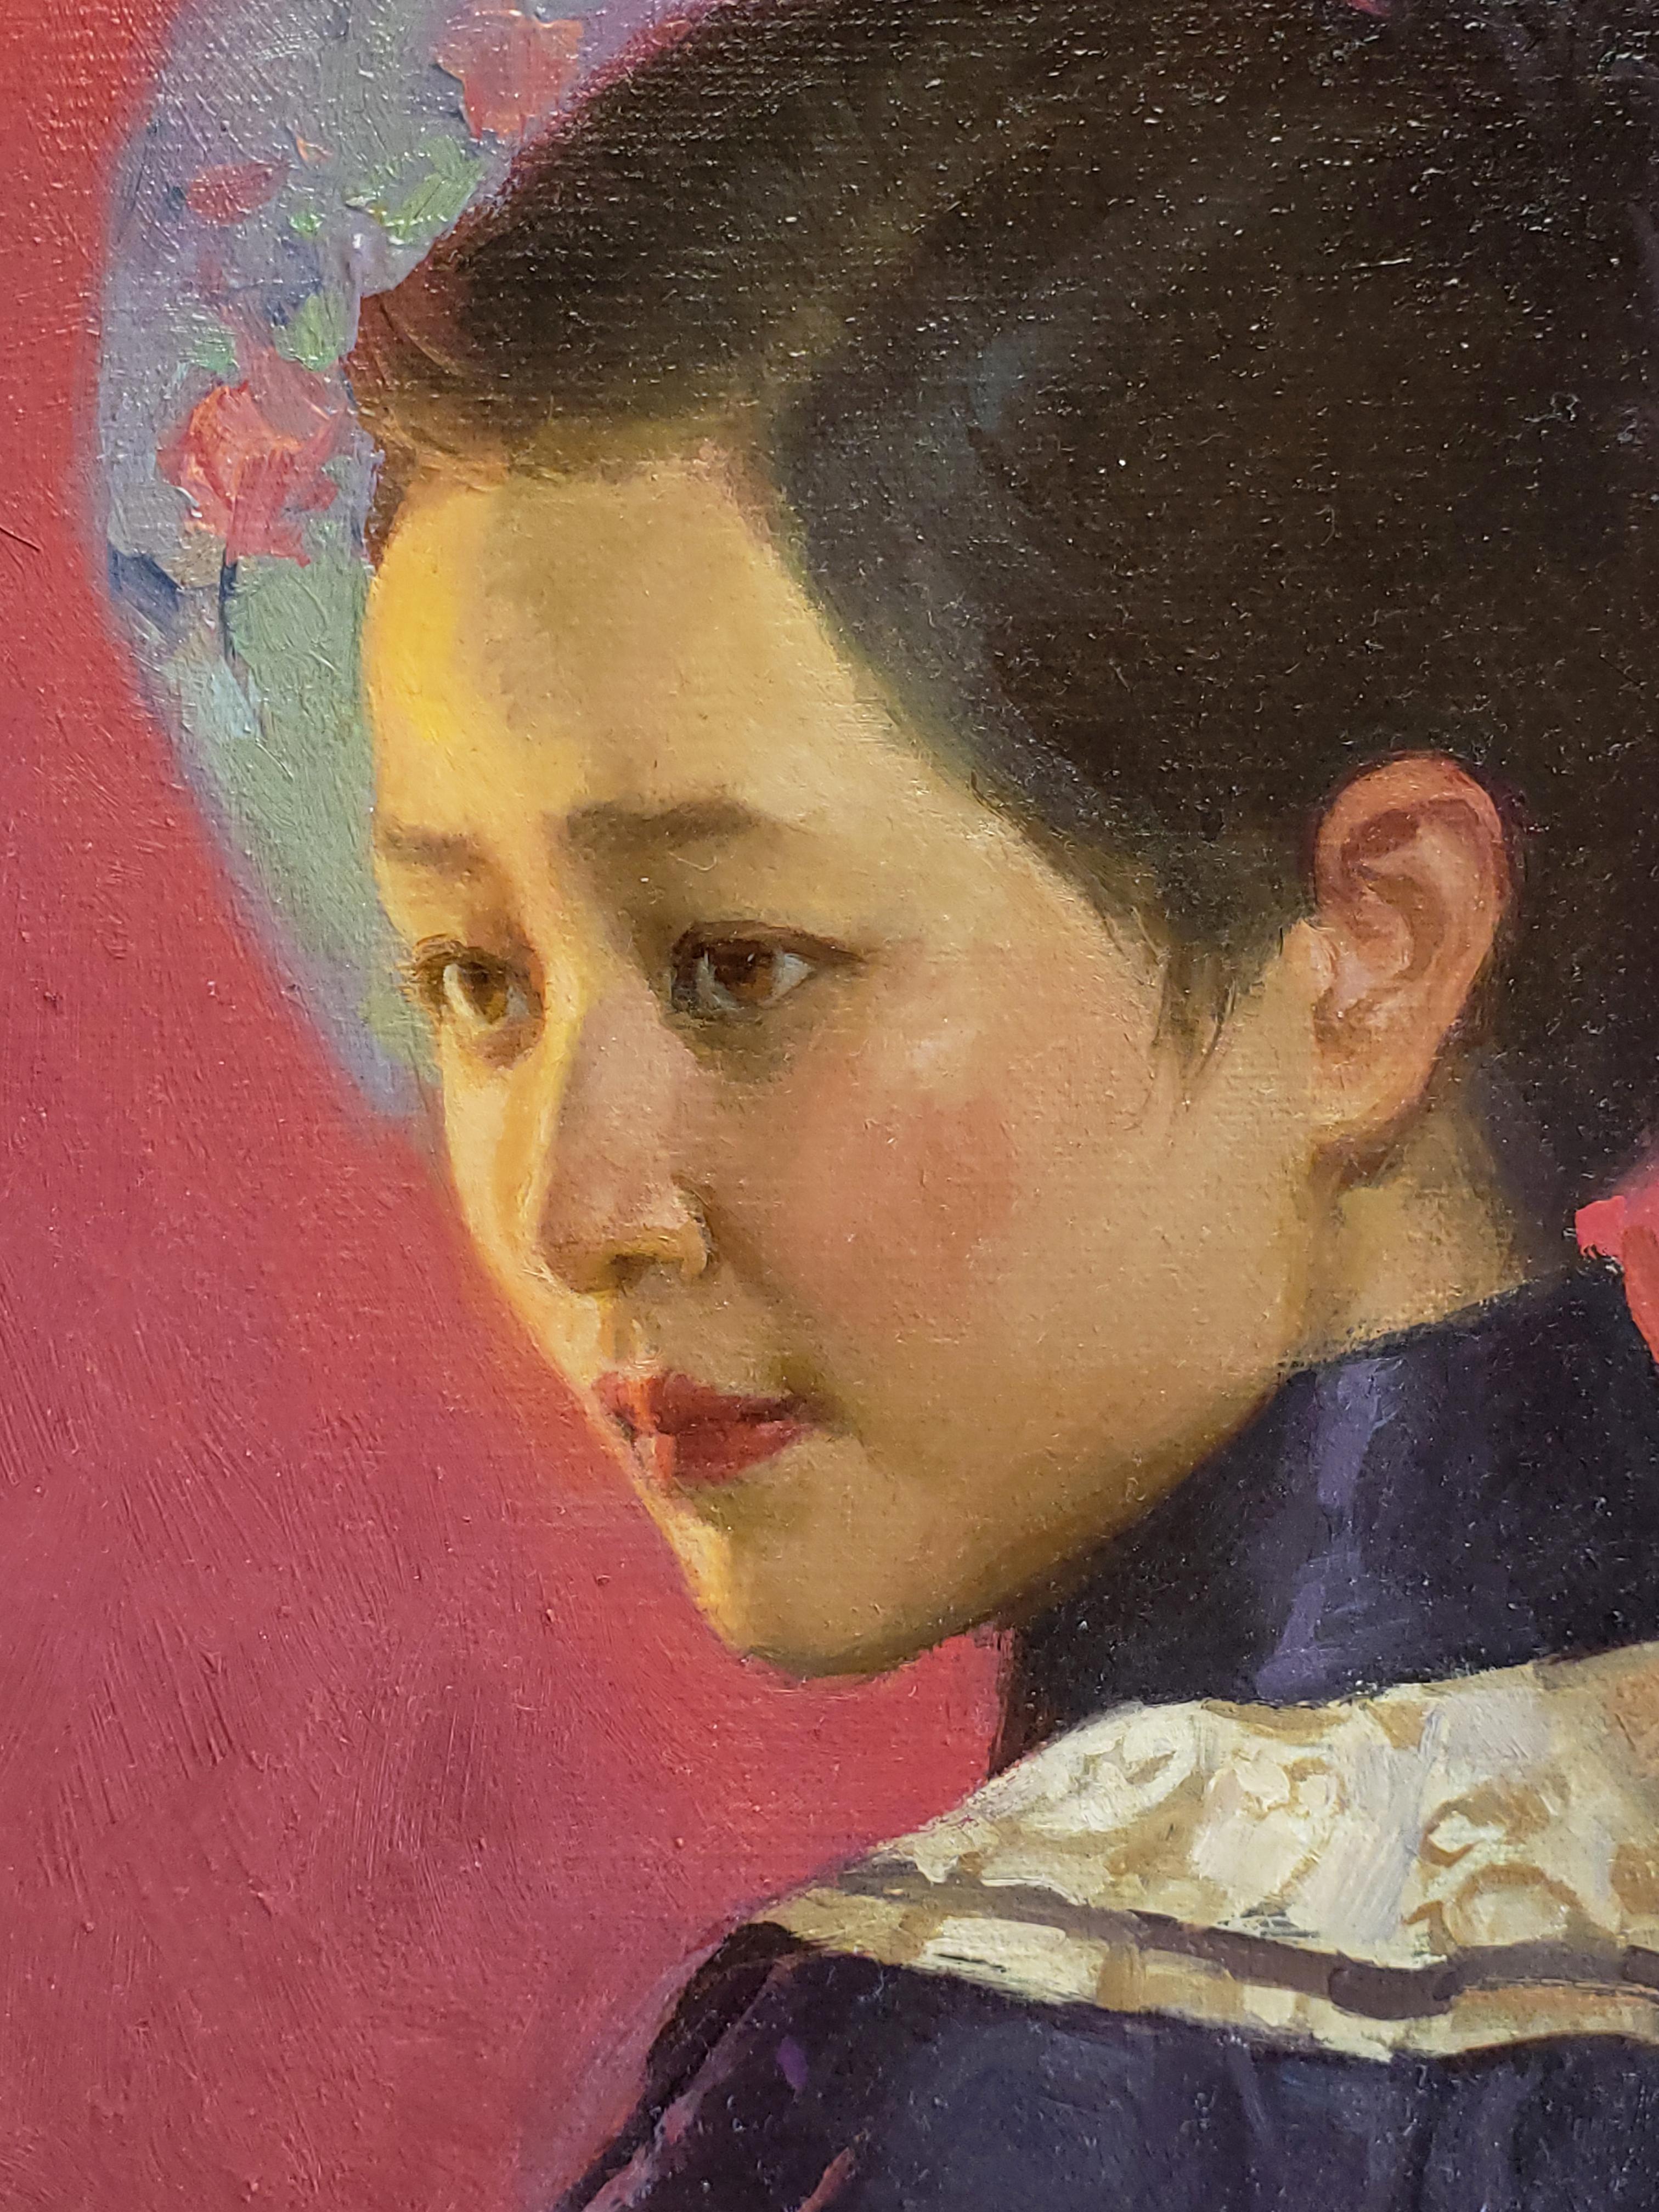 Provenance
Acquired by the gallery directly from the artist.

Description
The subject of this oil painting by Mian Situ shows a young woman standing poised in a moment of contemplation. The Lantern Festival is a time to remember departed family